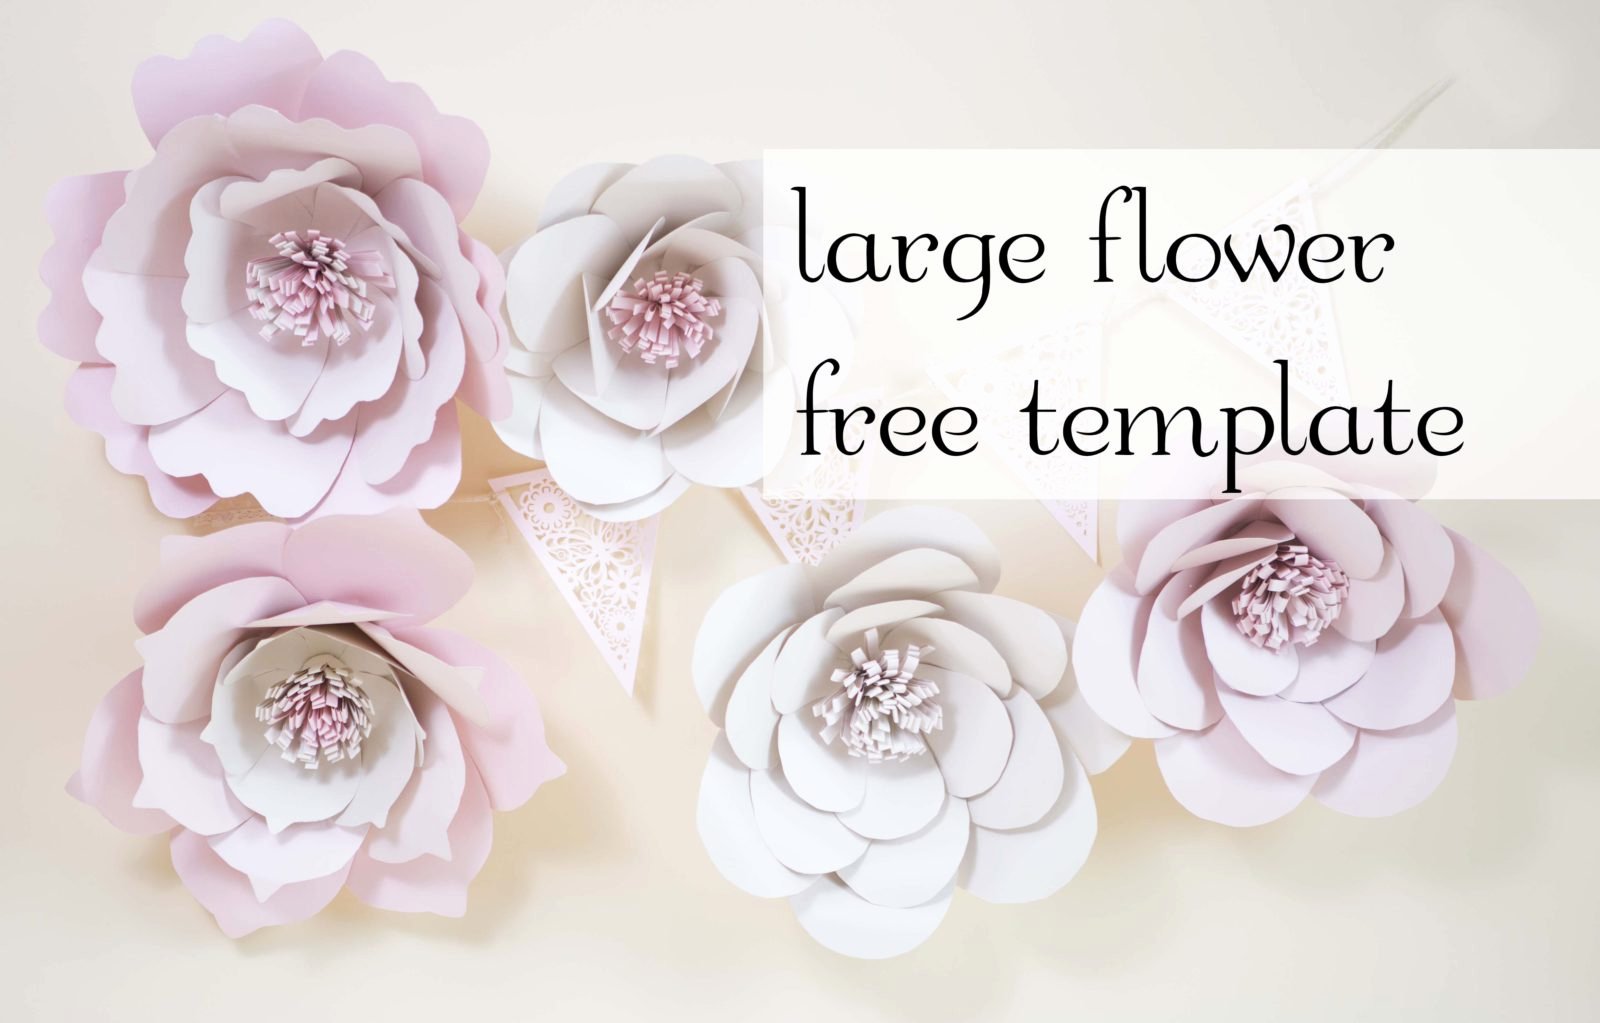 Giant Paper Flowers Free Template